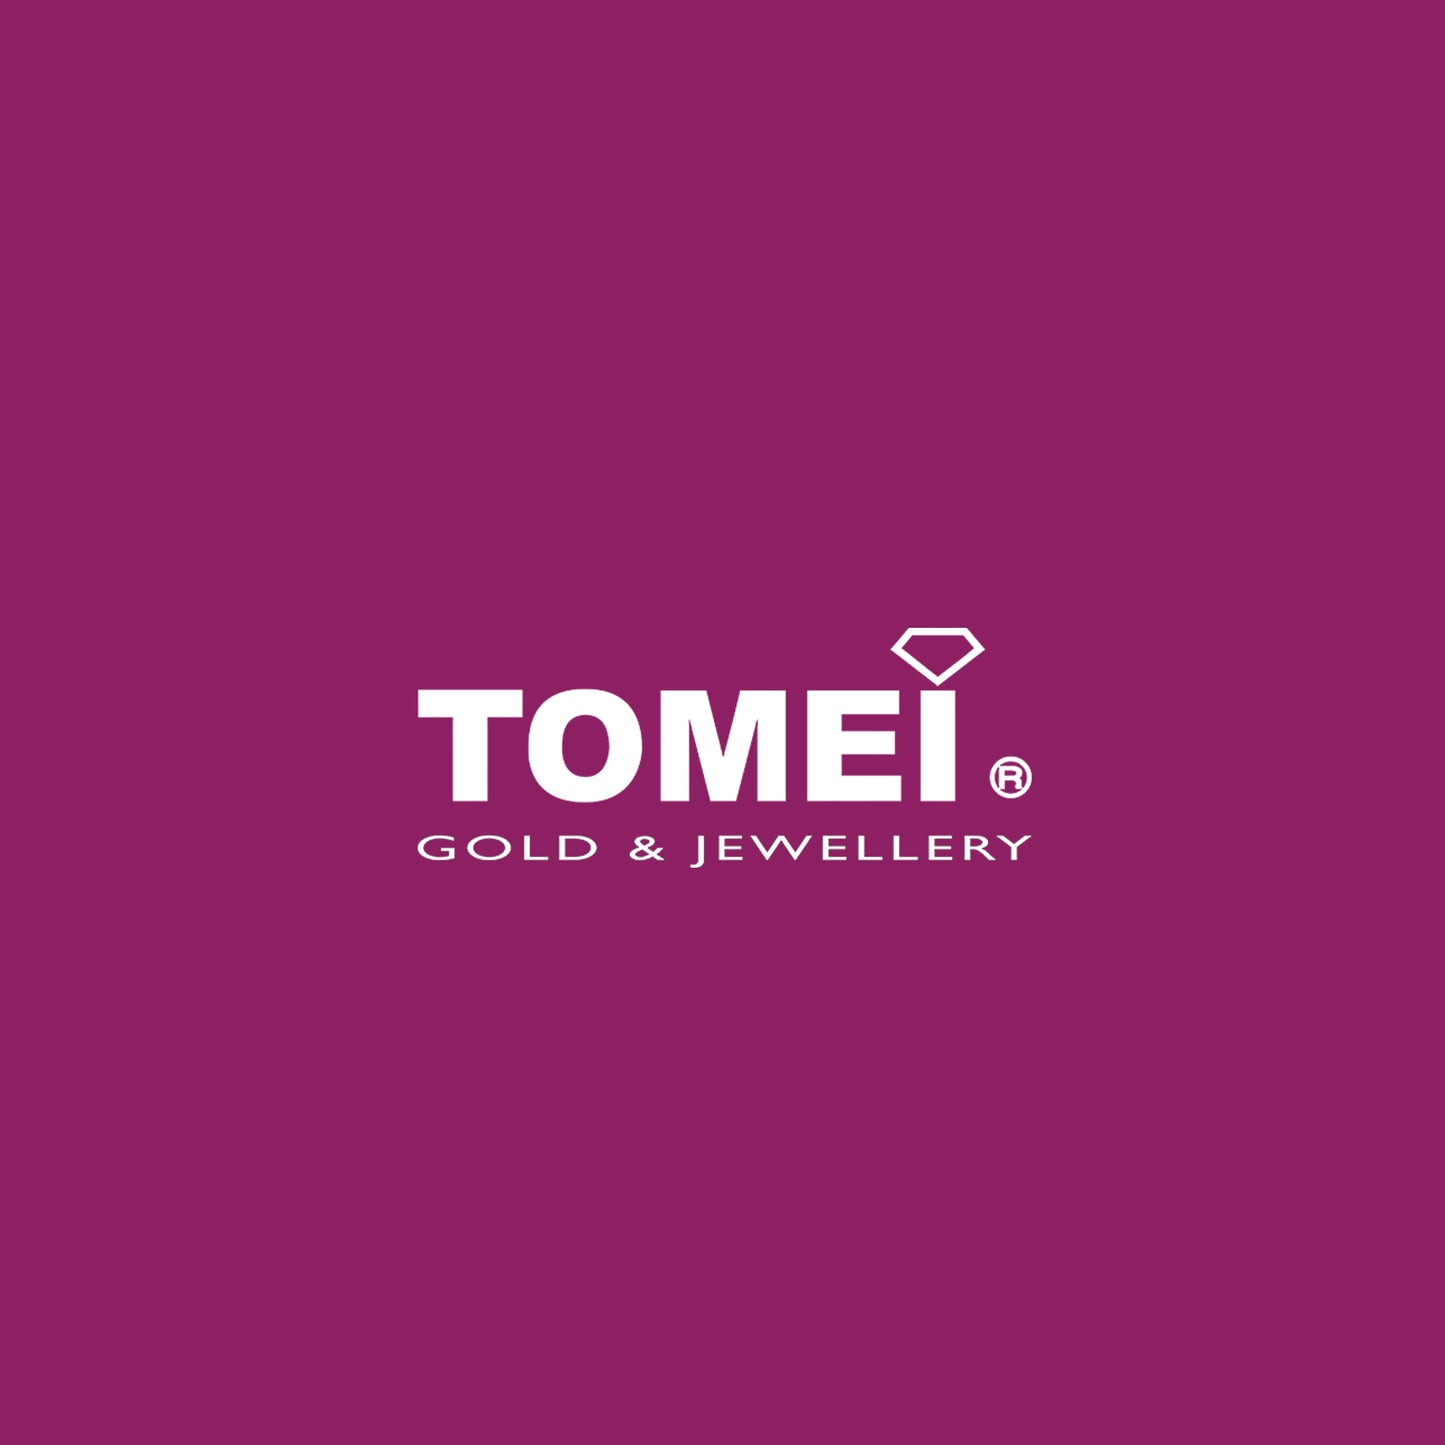 TOMEI Grinning Duck Pendant, White Gold 750